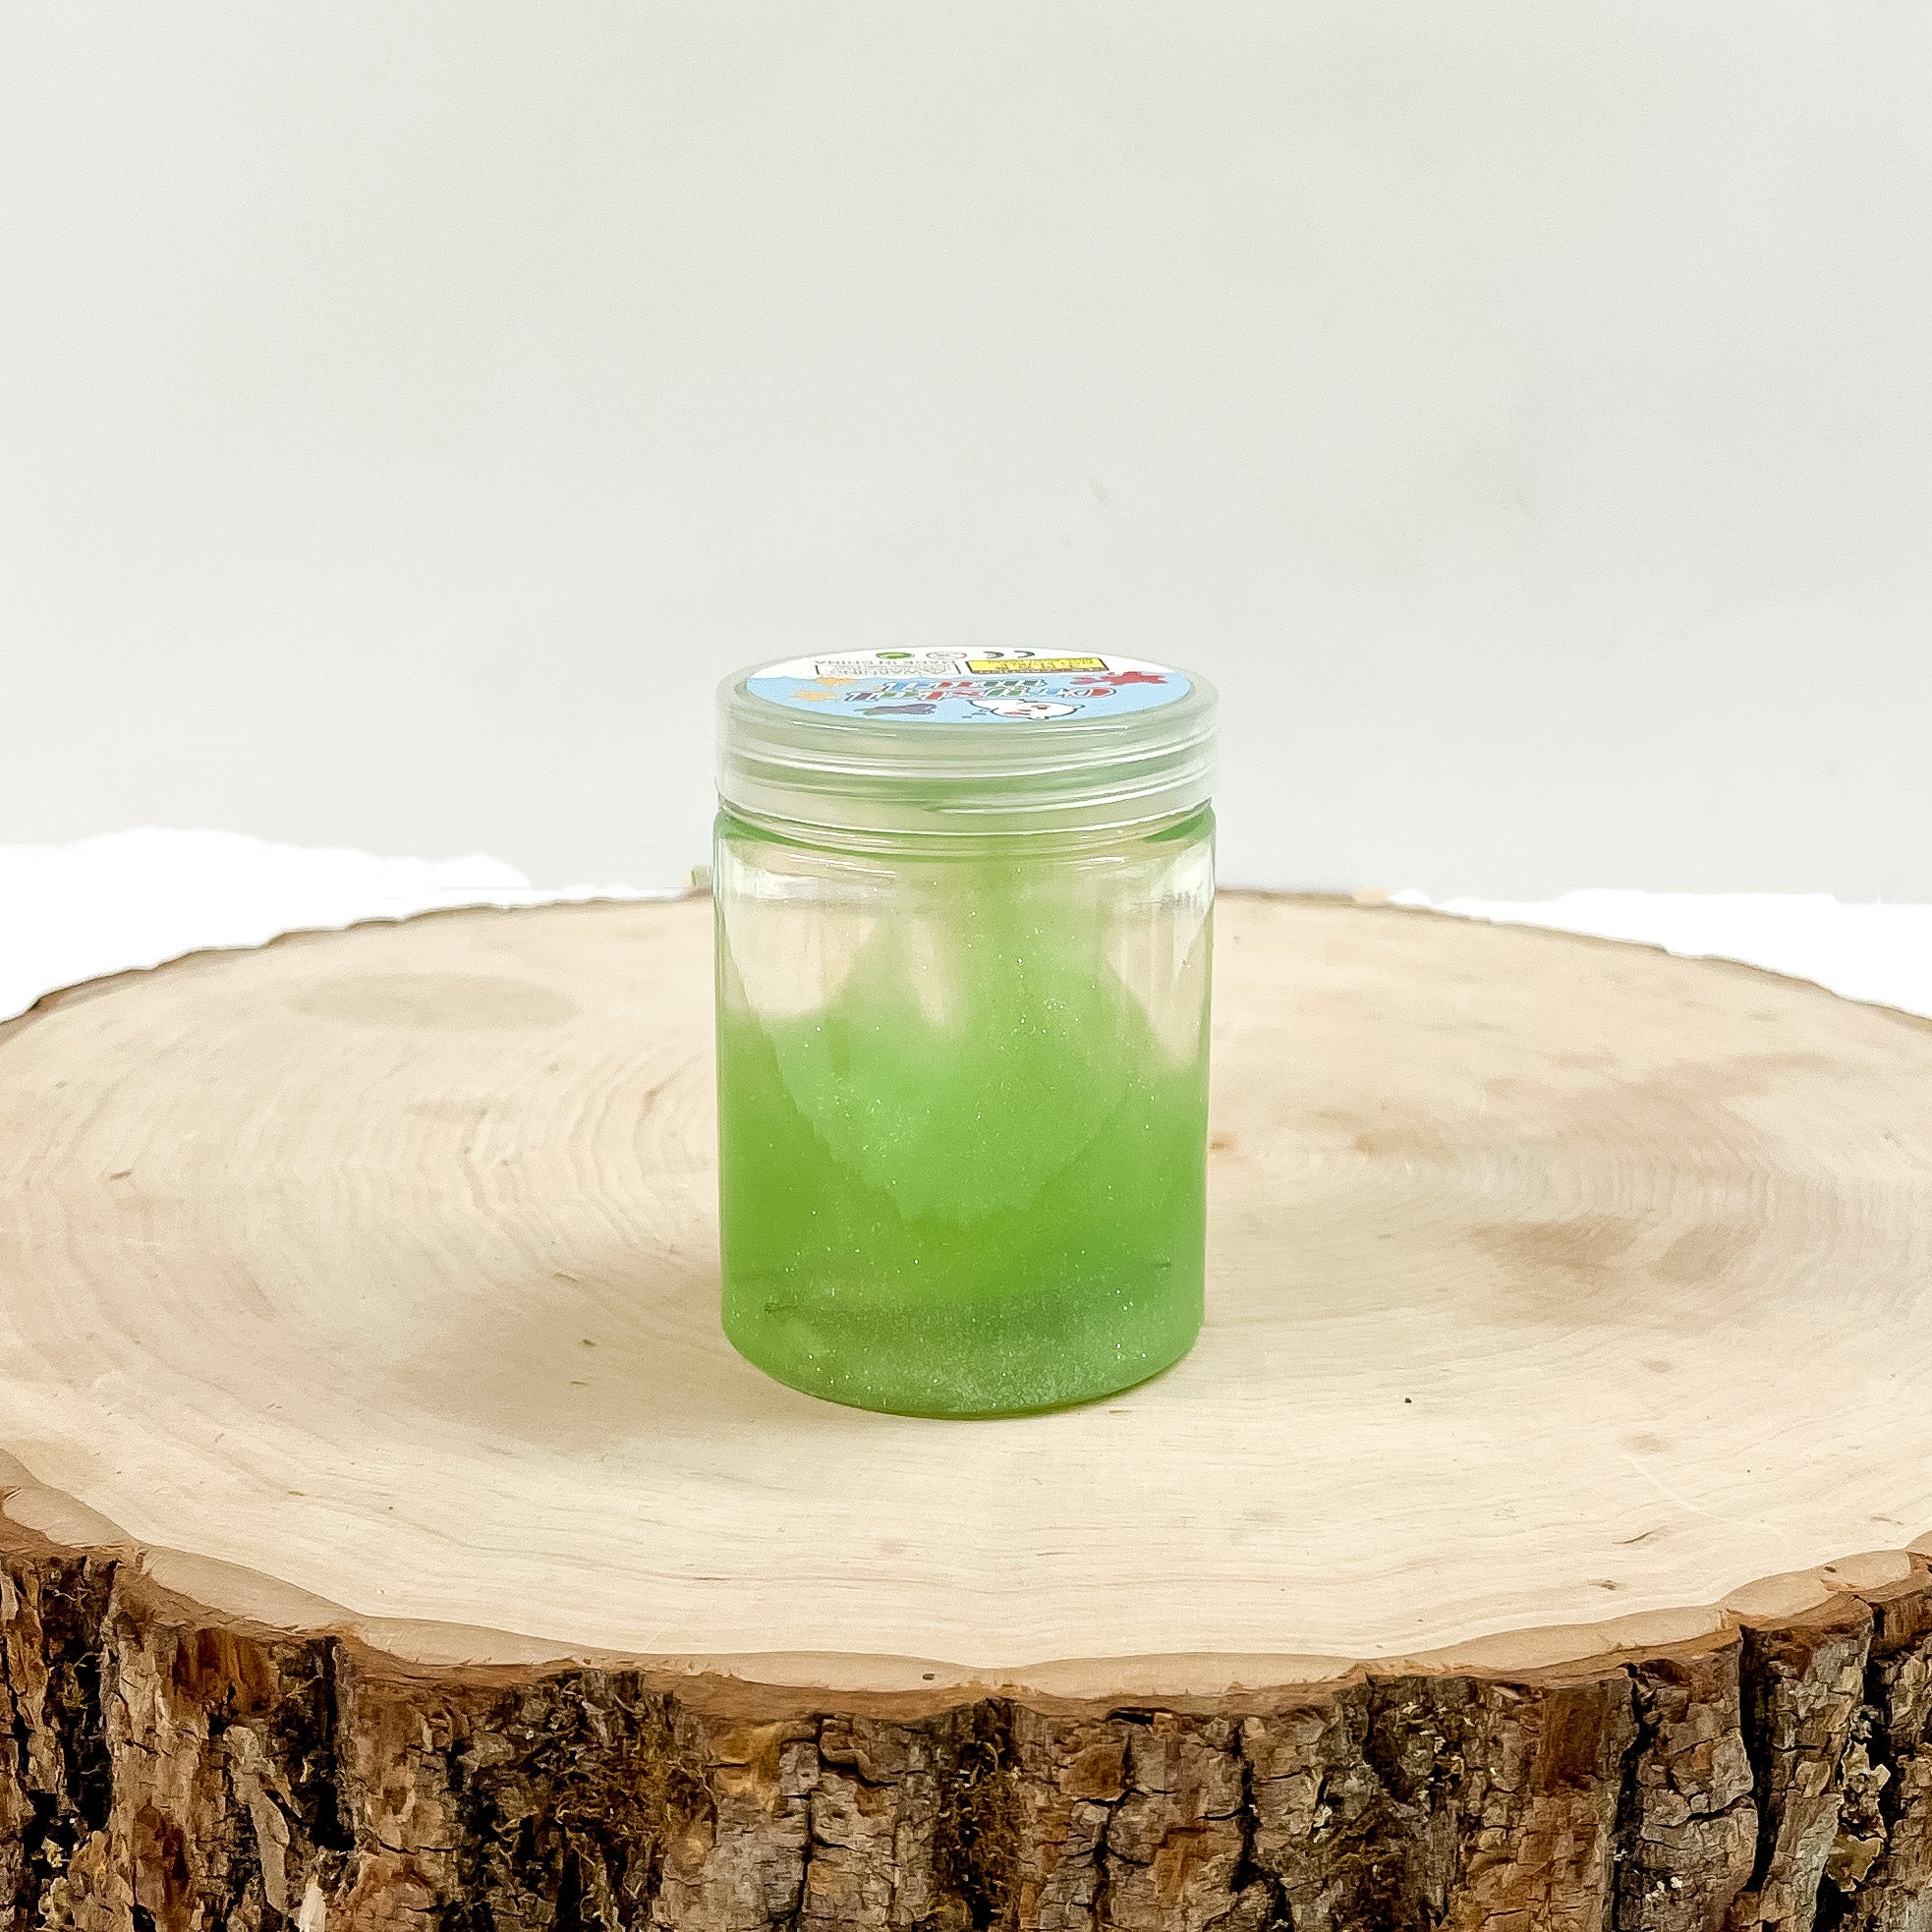 This is a clear slime with green glitter, this container is taken on a slab of  wood and on a white background.